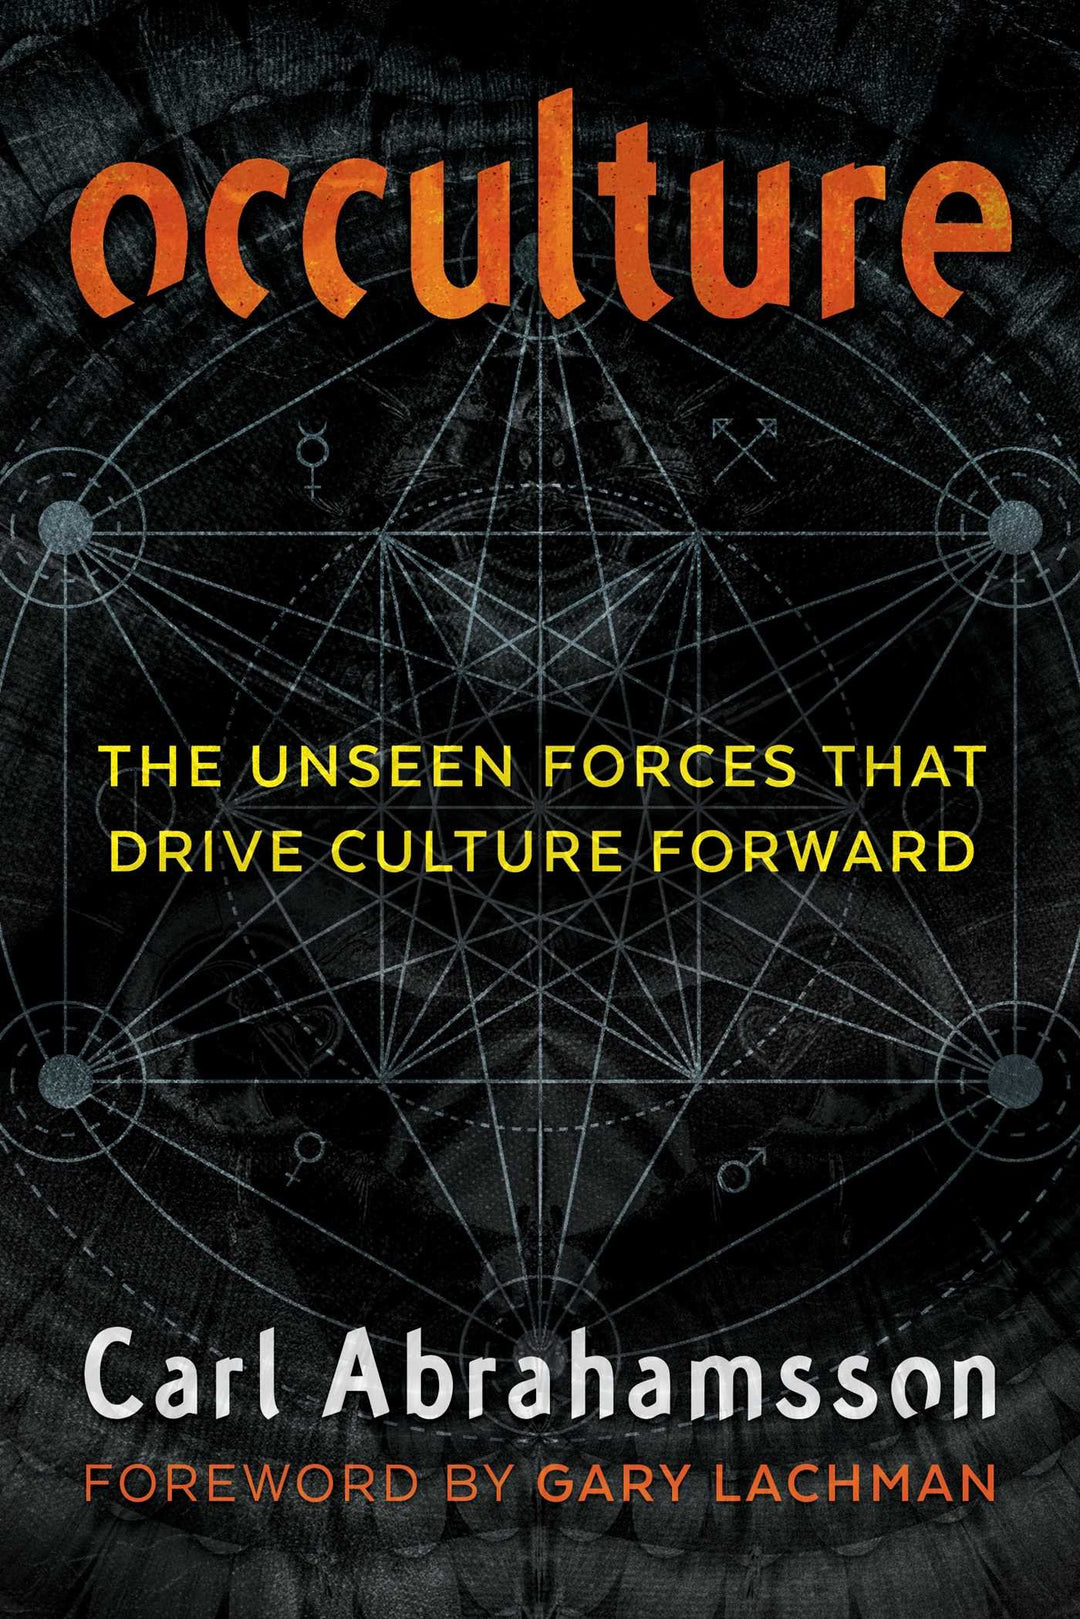 Occulture: The Unseen Forces That Drive Culture Forward by Carl Abrahamsson